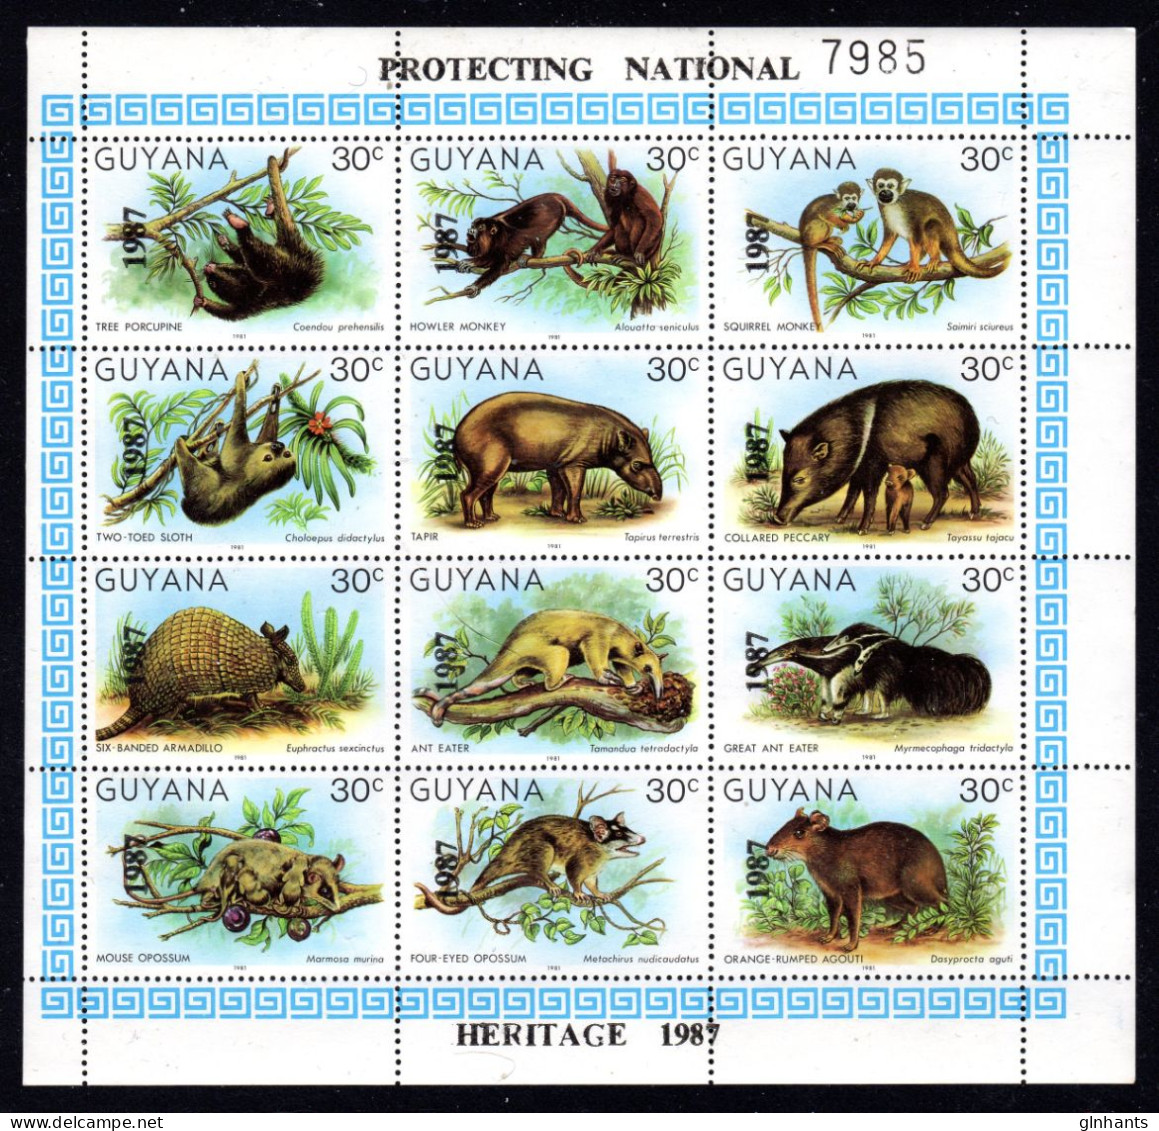 GUYANA - 1987 WILDLIFE ANIMALS SHEETLET OVERPRINTED WITH YEAR & PROTECTING NATIONAL HERITAGE FINE MNH ** SG 2244a - Guyane (1966-...)